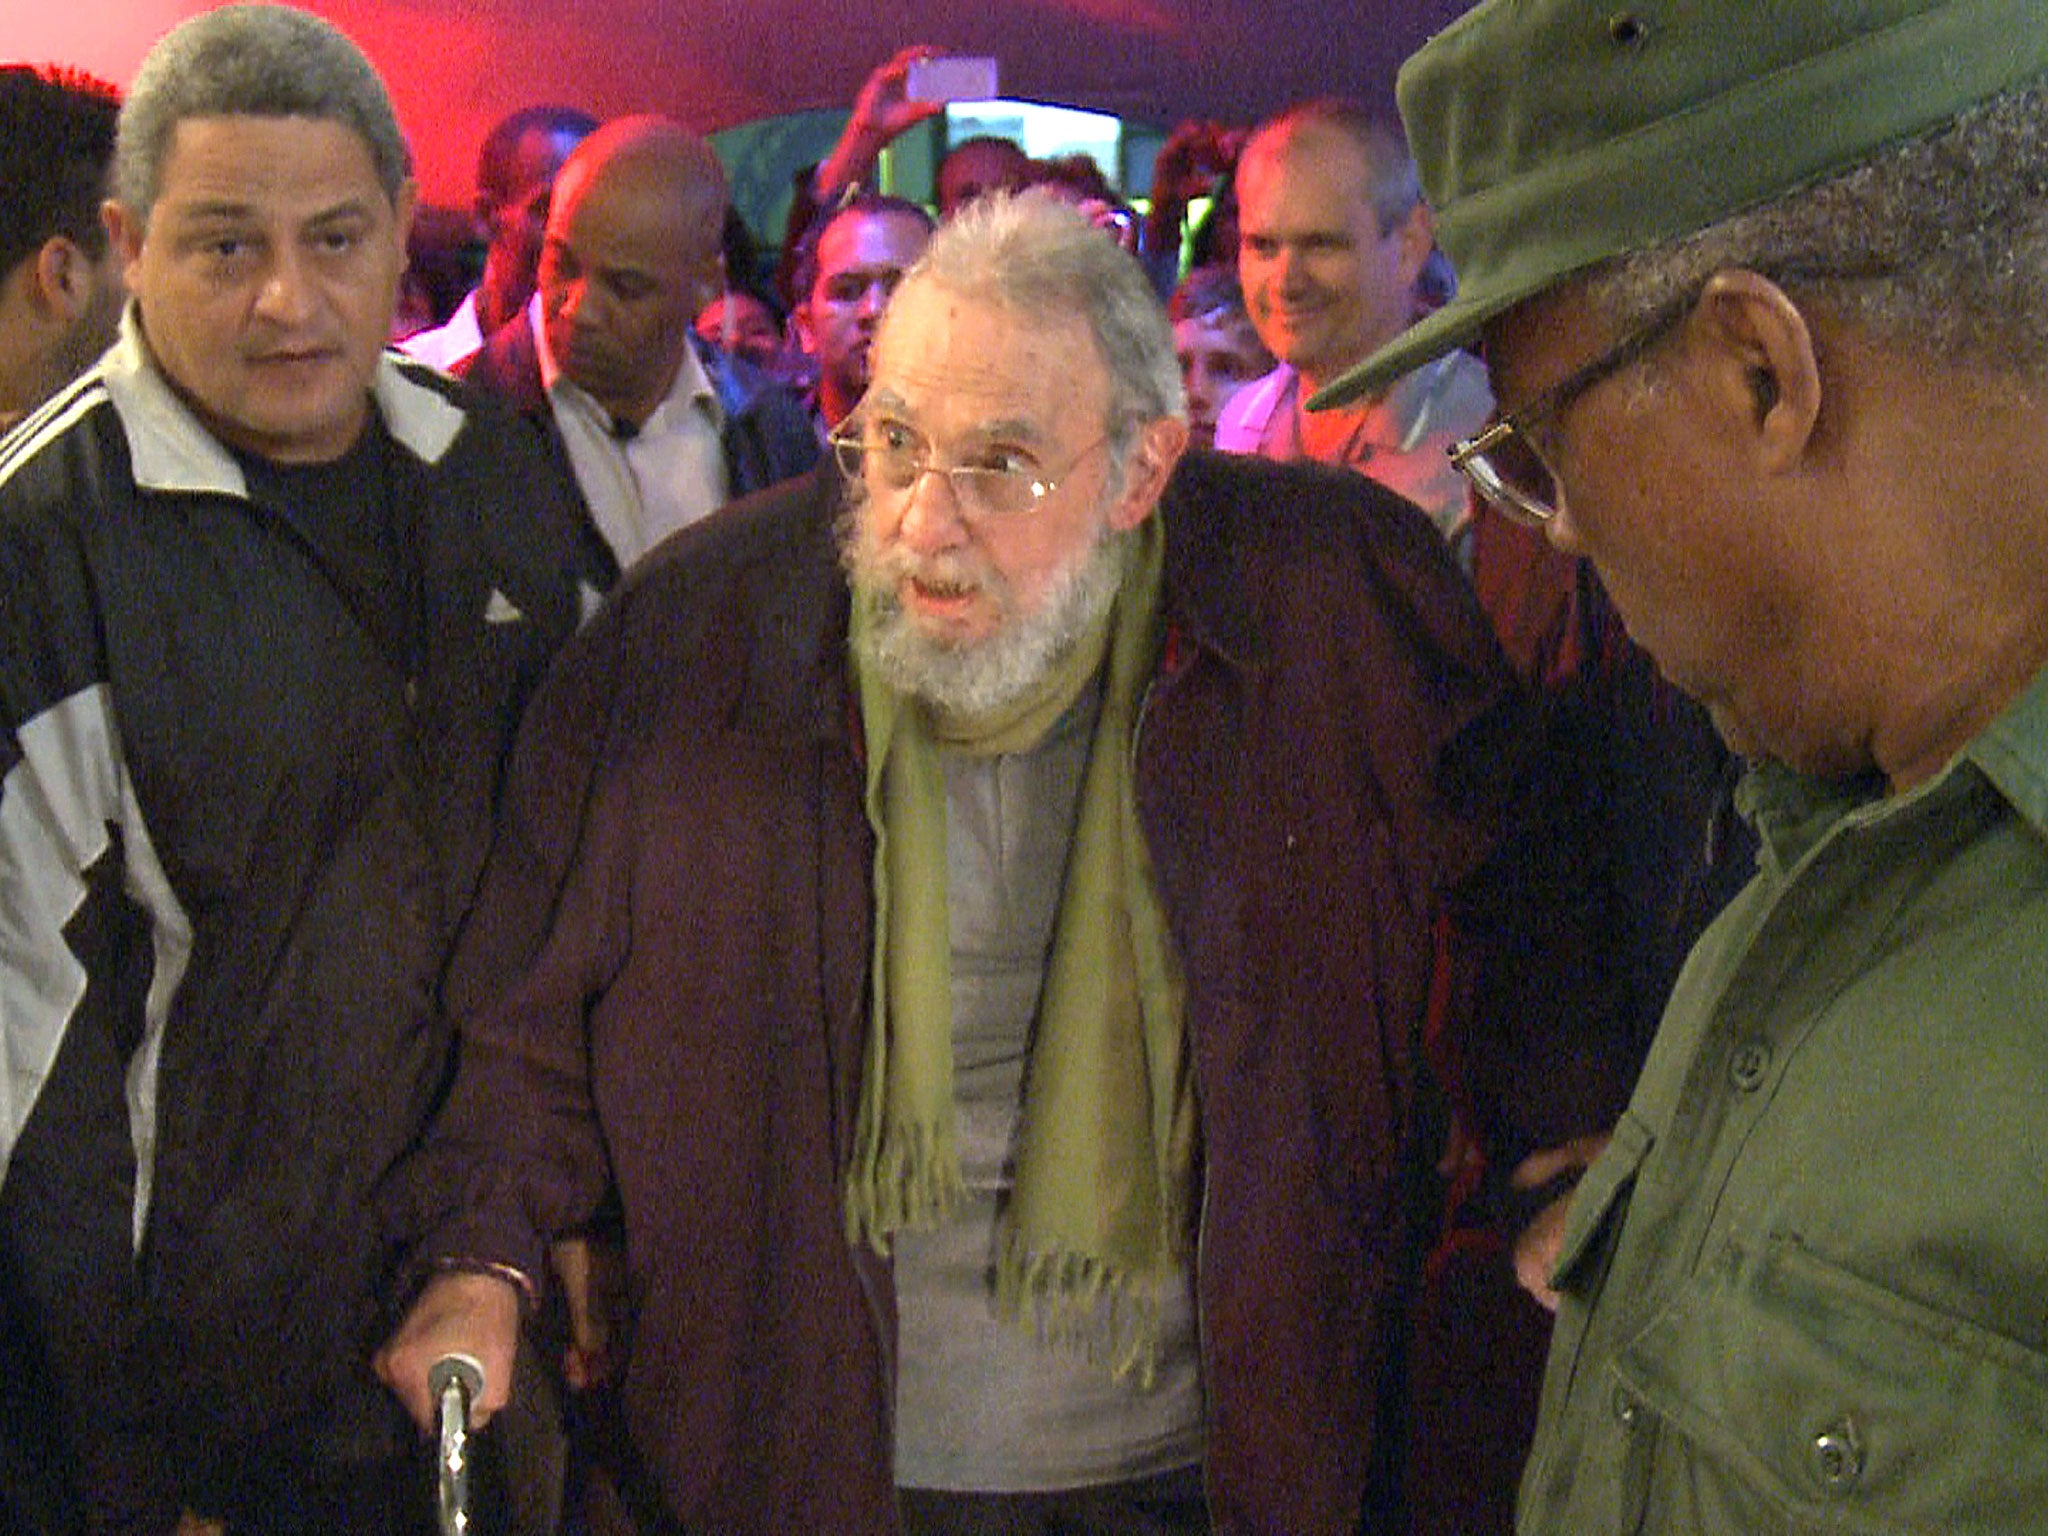 Cuban leader Fidel Castro has appeared in public for the first time in nine months, attending an art gallery opening near his home